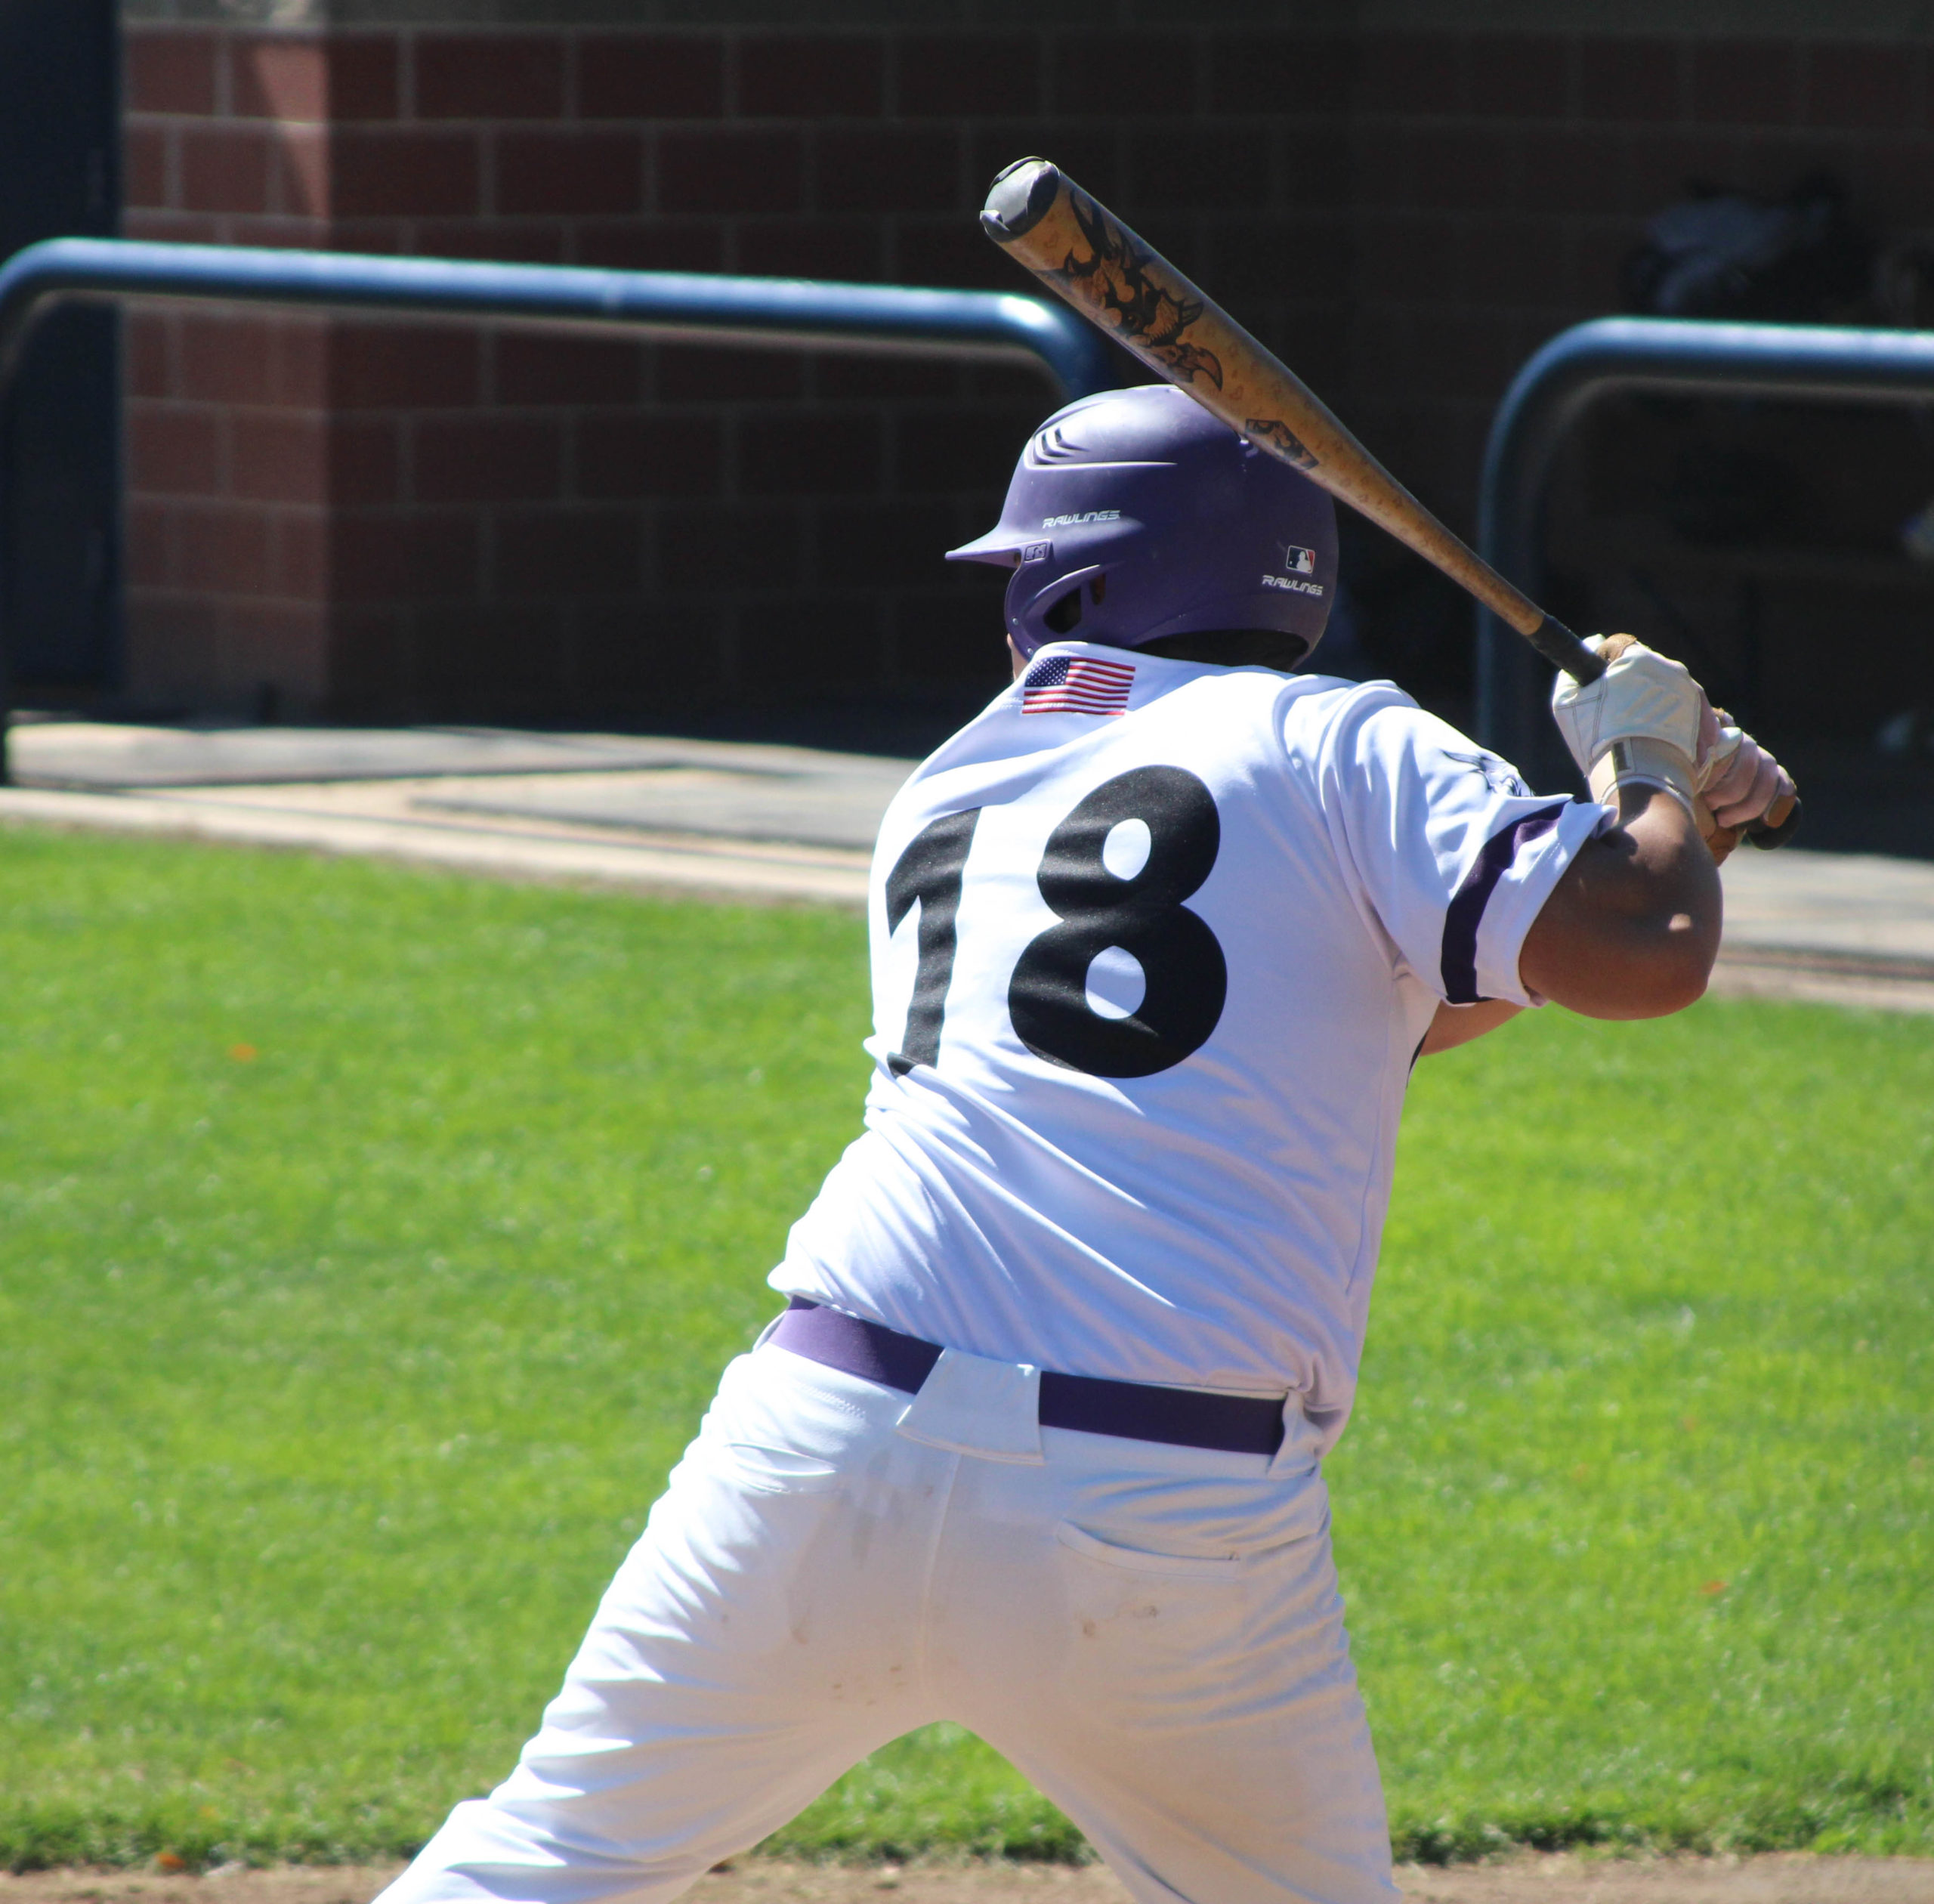 Weber State Mens Club Baseball, Estabon Romero (18), getting prepared to hit the ball as it is about to be pitched.